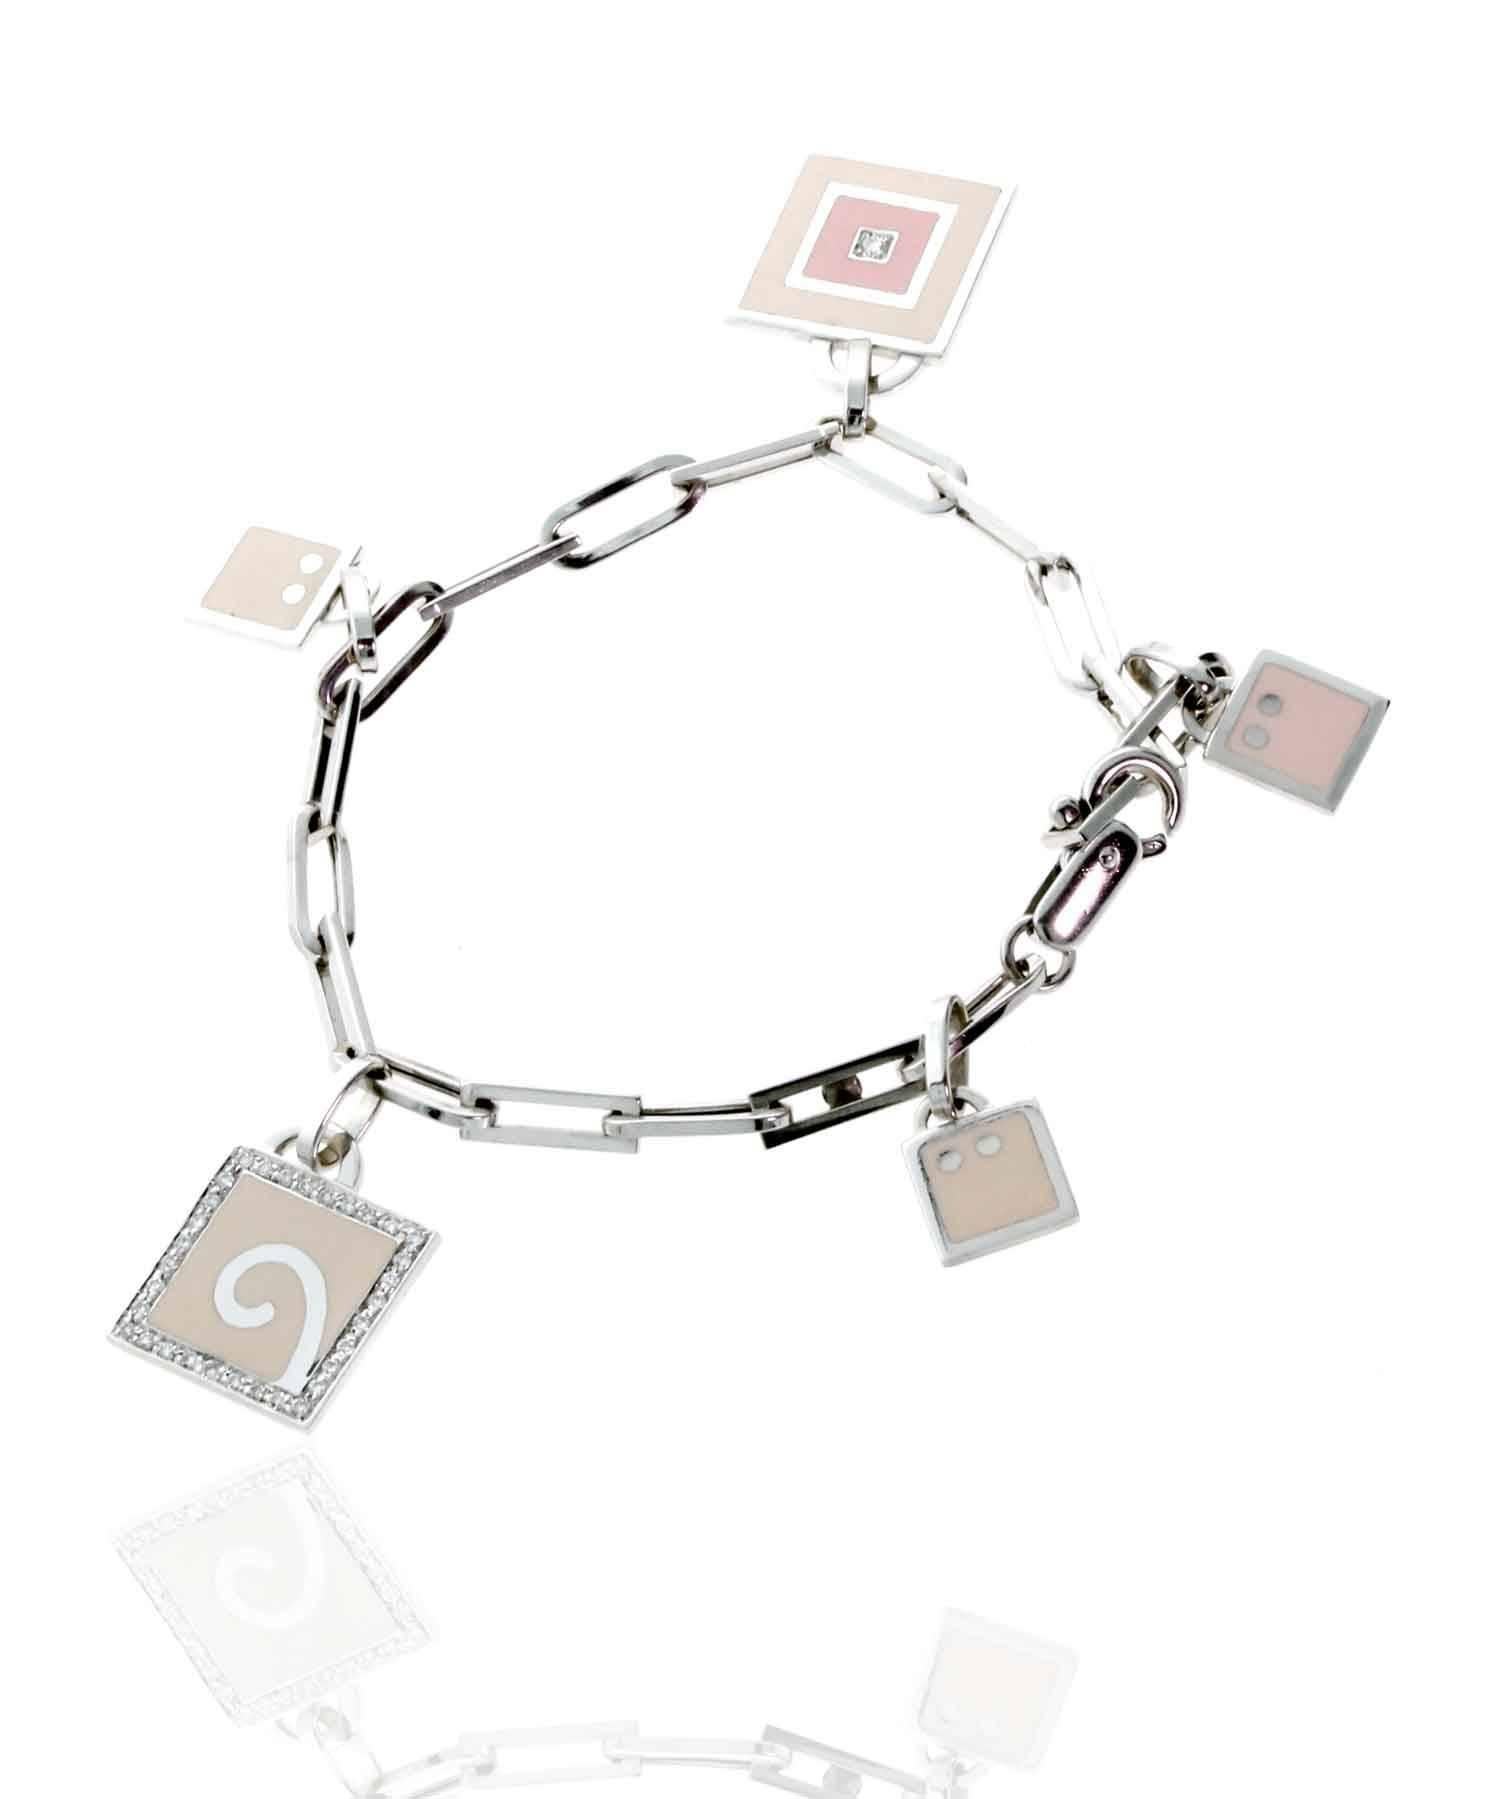 A stunning 18k white gold charm bracelet by La Nouvelle Bague. Each of its 5 beautiful charms has a distinct design and unique patern.

Length: Upto 7 1/4″

Diamonds: Round Brilliant Cut Diamonds .44Ct Total Diamond Weight
Weight: 17.7